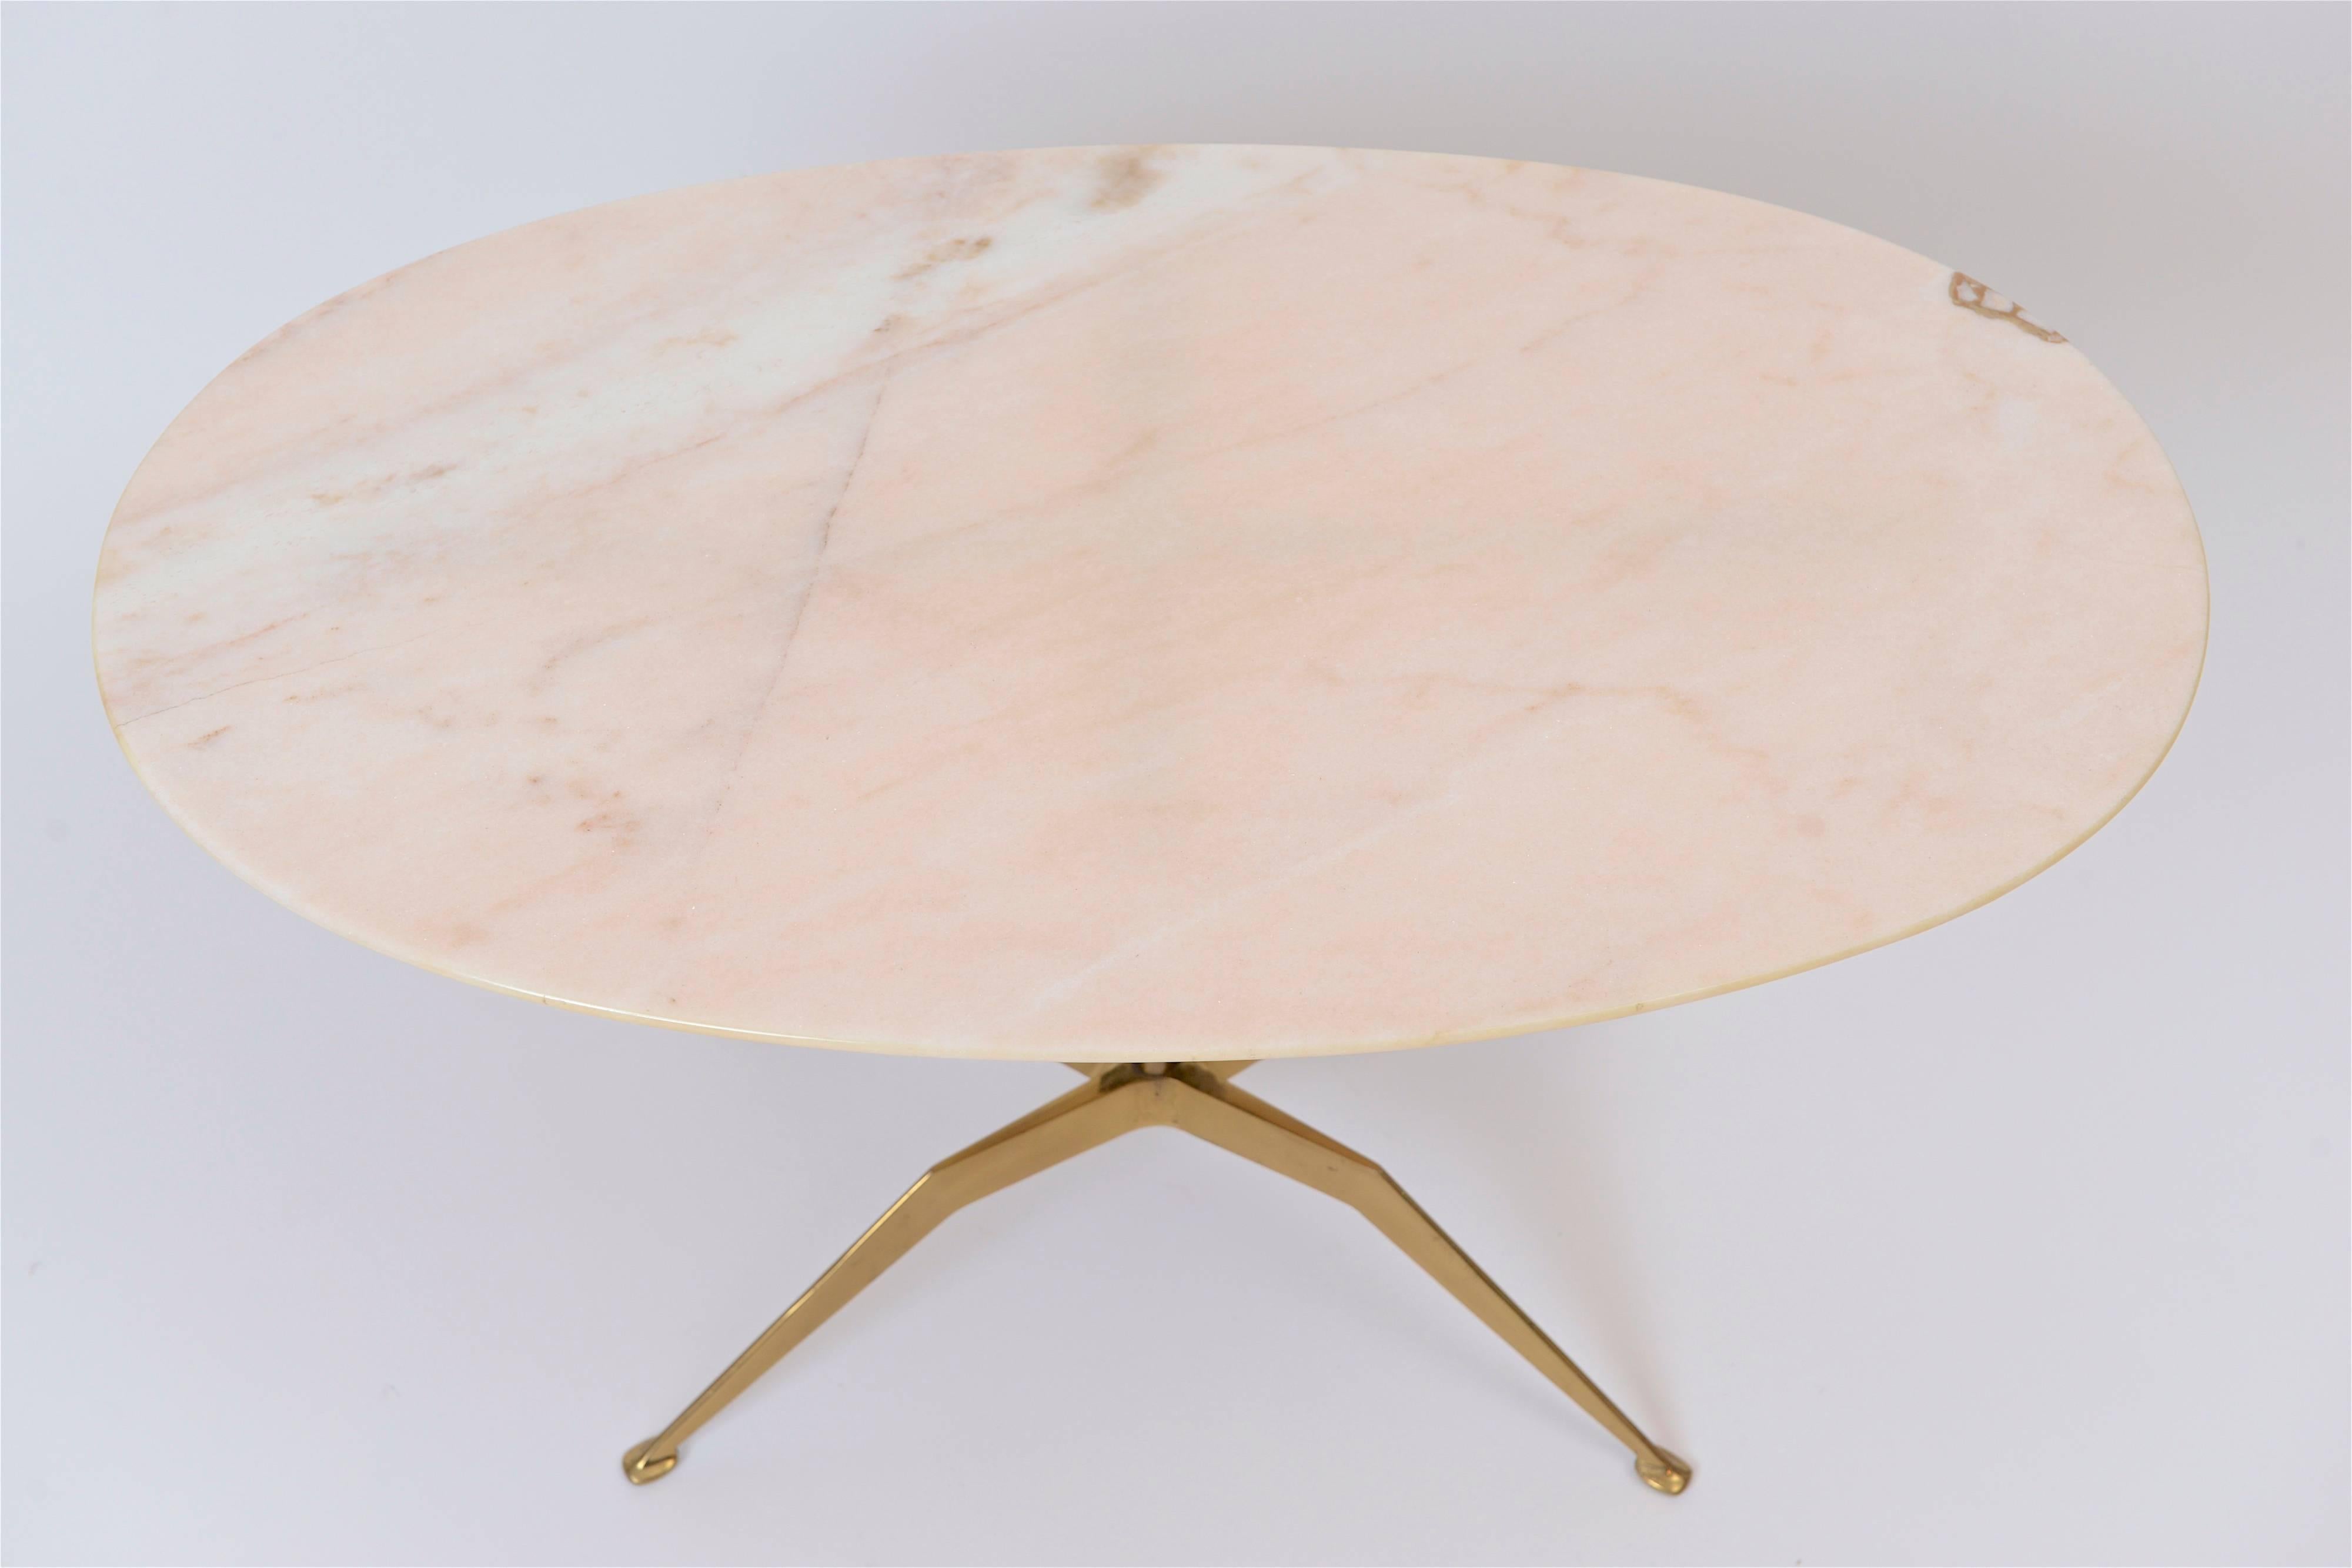 20th Century 1950s Italian Onyx Coffee Table with Decorative Brass Support